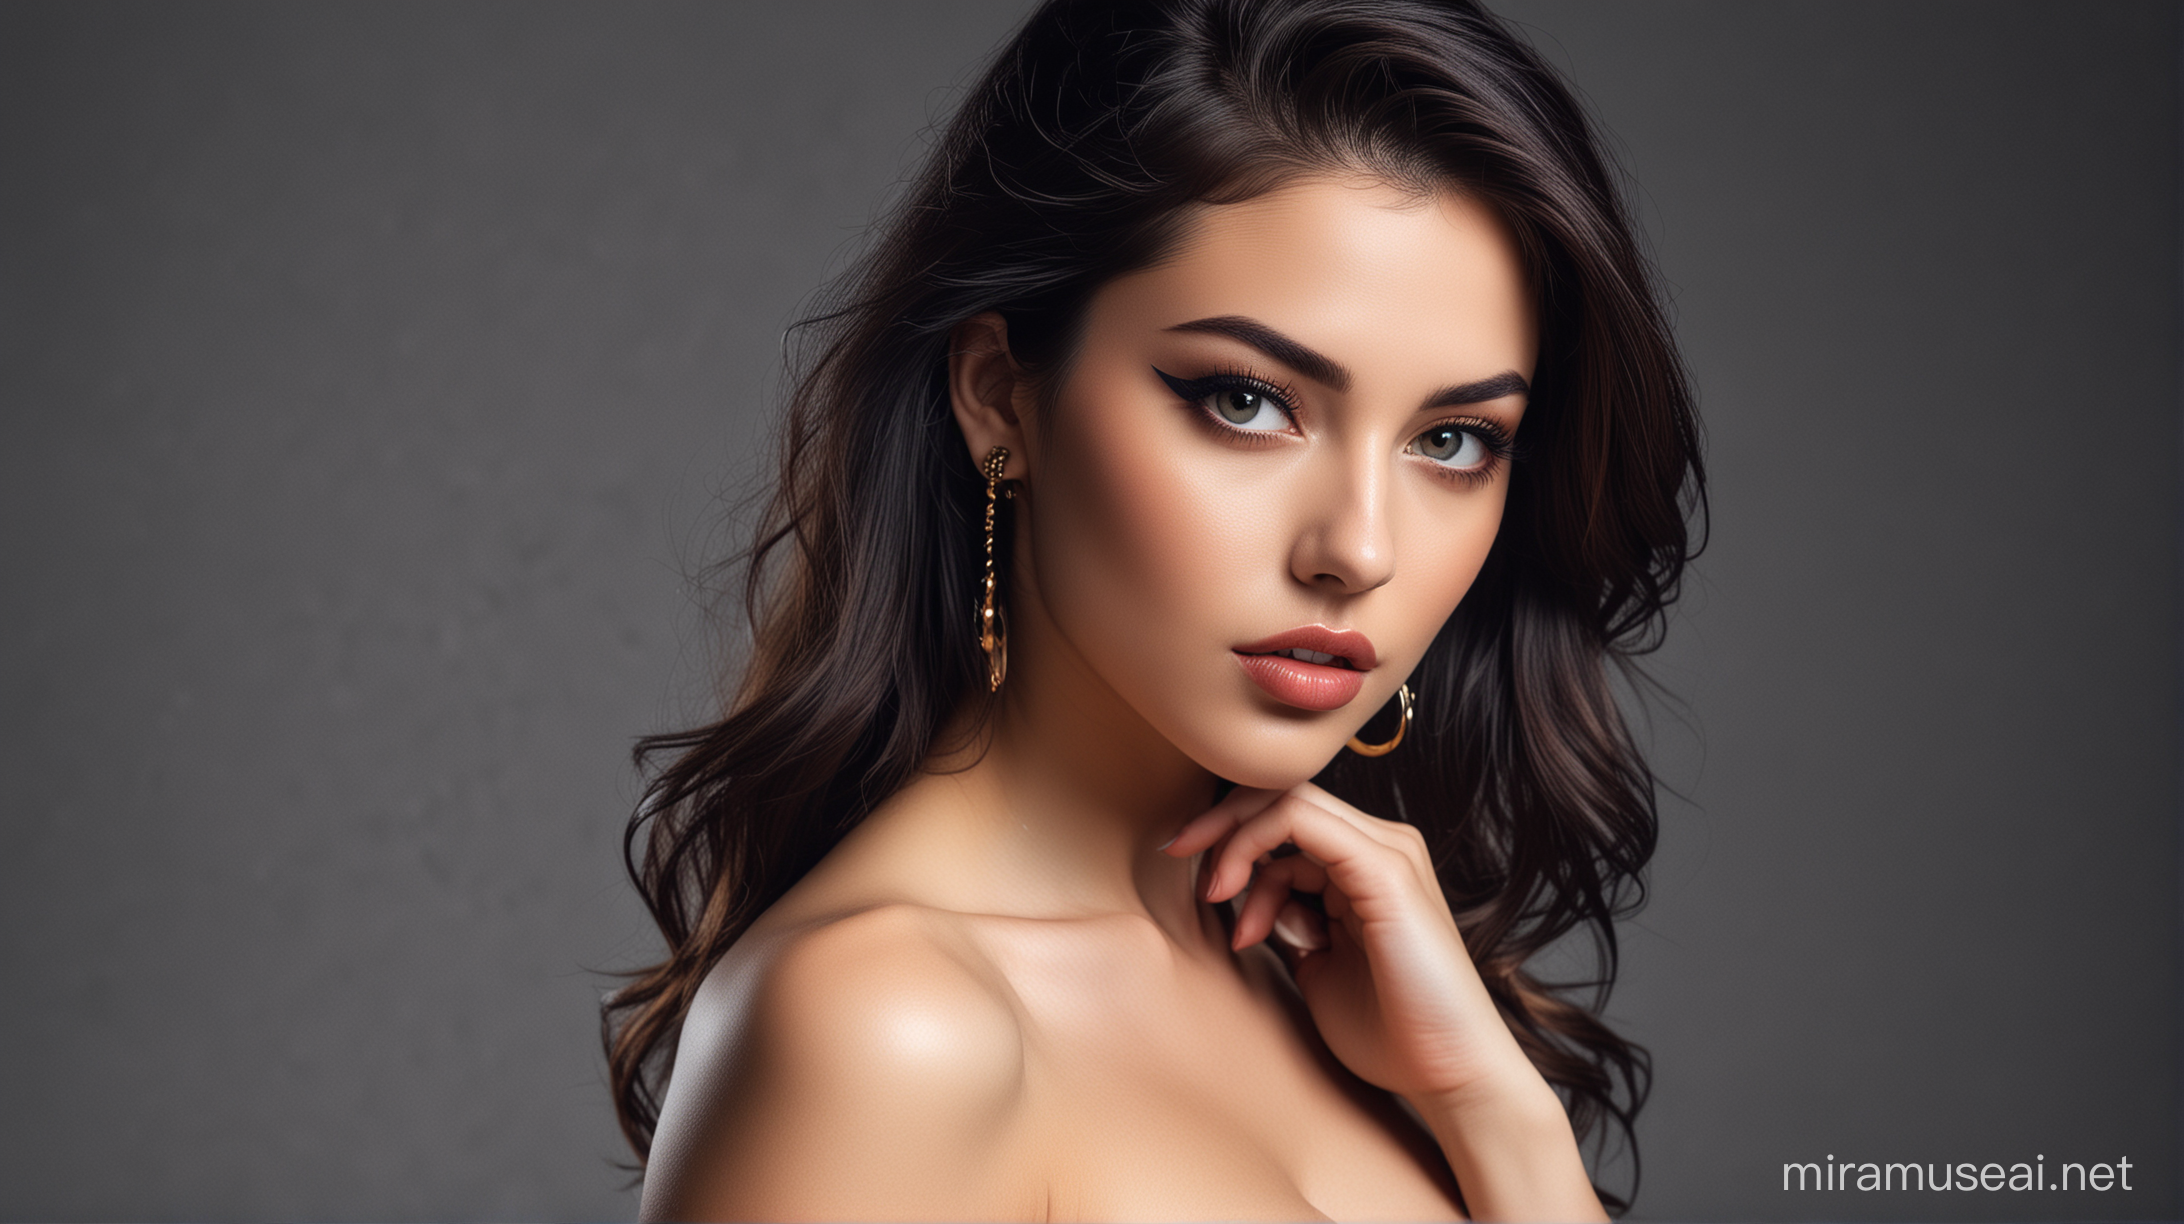 Sultry Seductresses and Fierce Fashionistas HighResolution 8K Wallpaper Collection